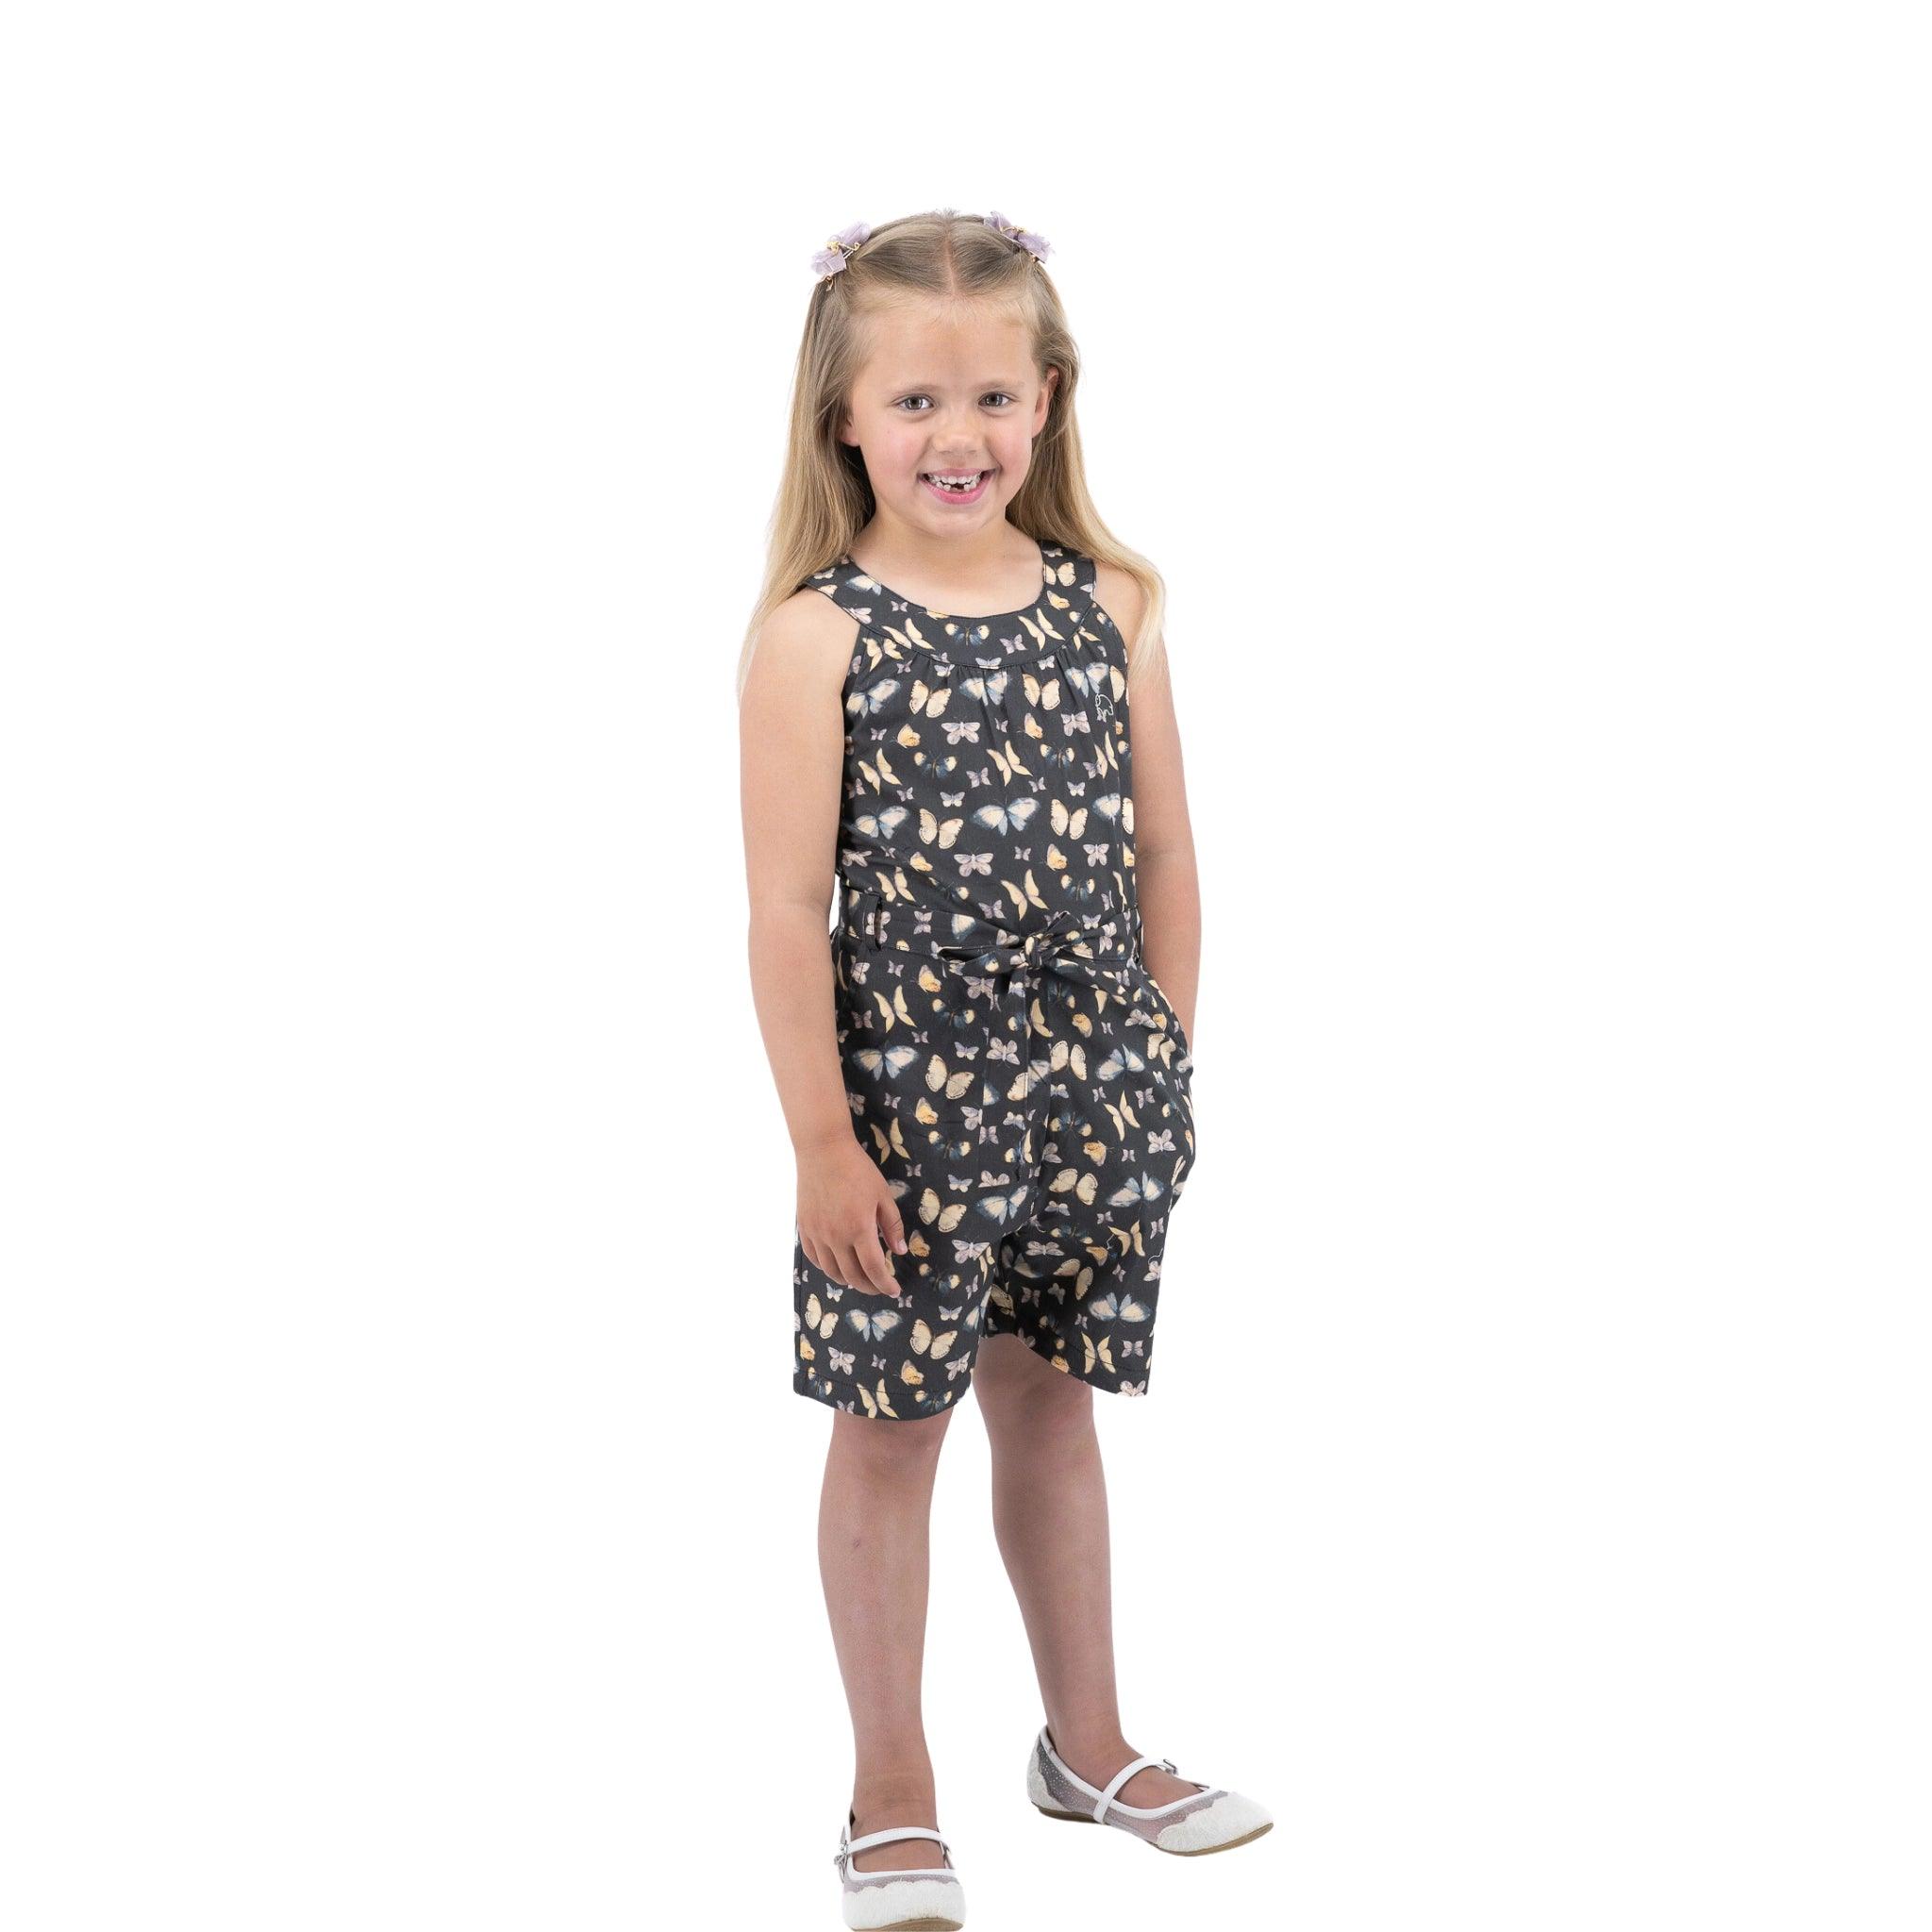 A young girl in a Karee Pirate Black Adventure-ready Cotton Play Suit with a waist belt and white shoes smiling and posing against a white background.